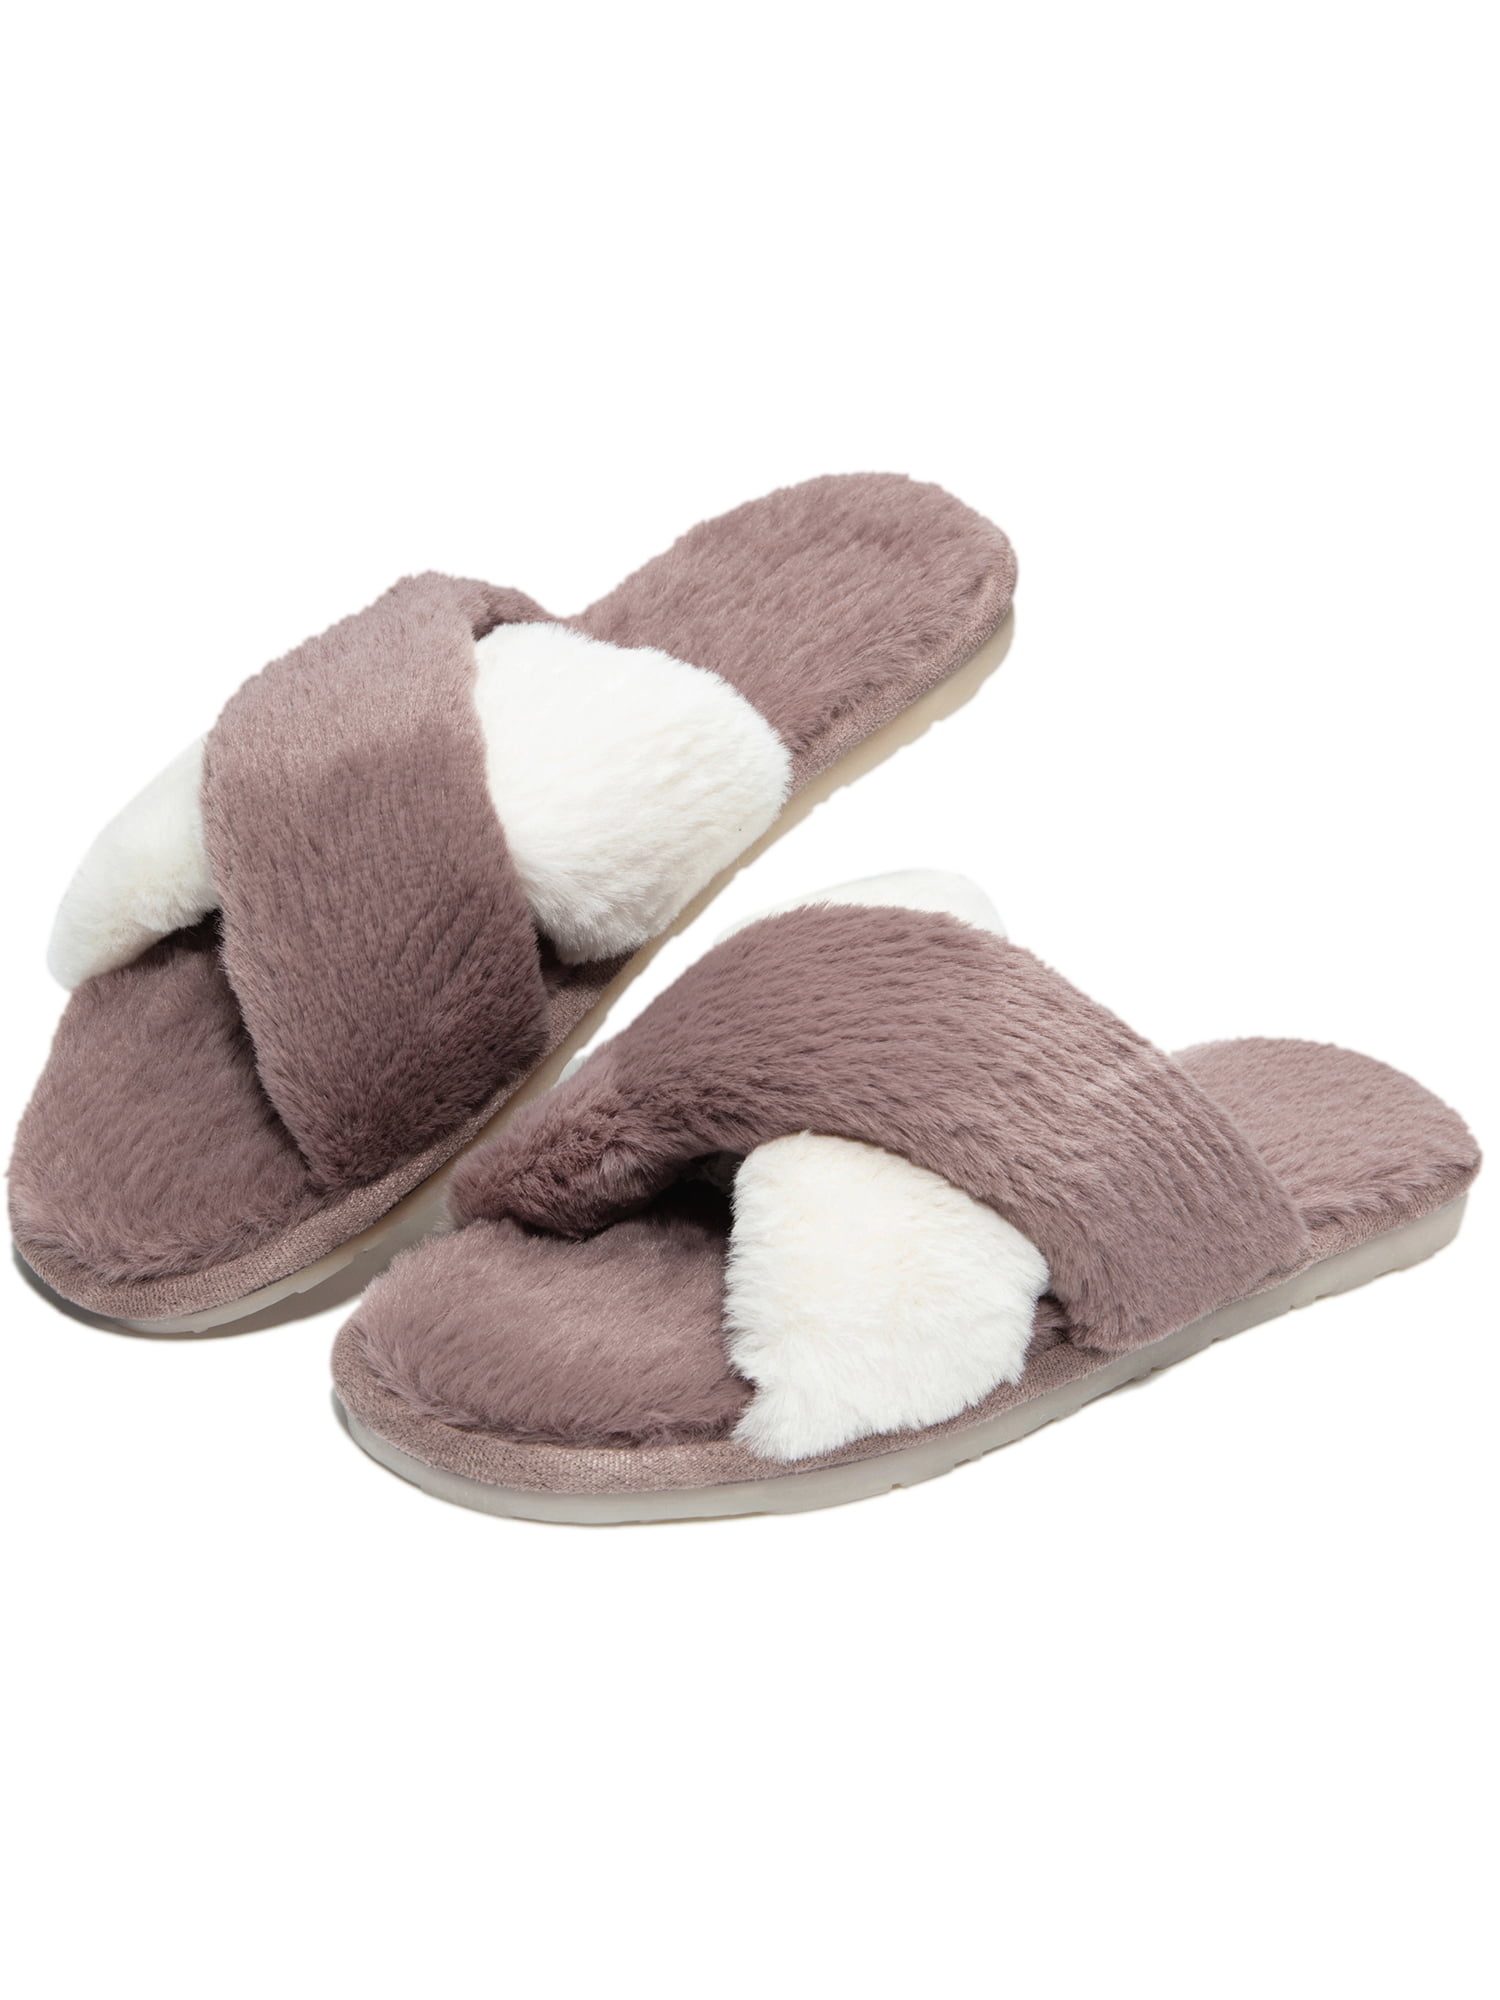 Fuzzy Cross Band Slide House Slippers Soft Fluffy Faux Fur Open Toe Indoor Outdoor Shoes Slippers for Woman 